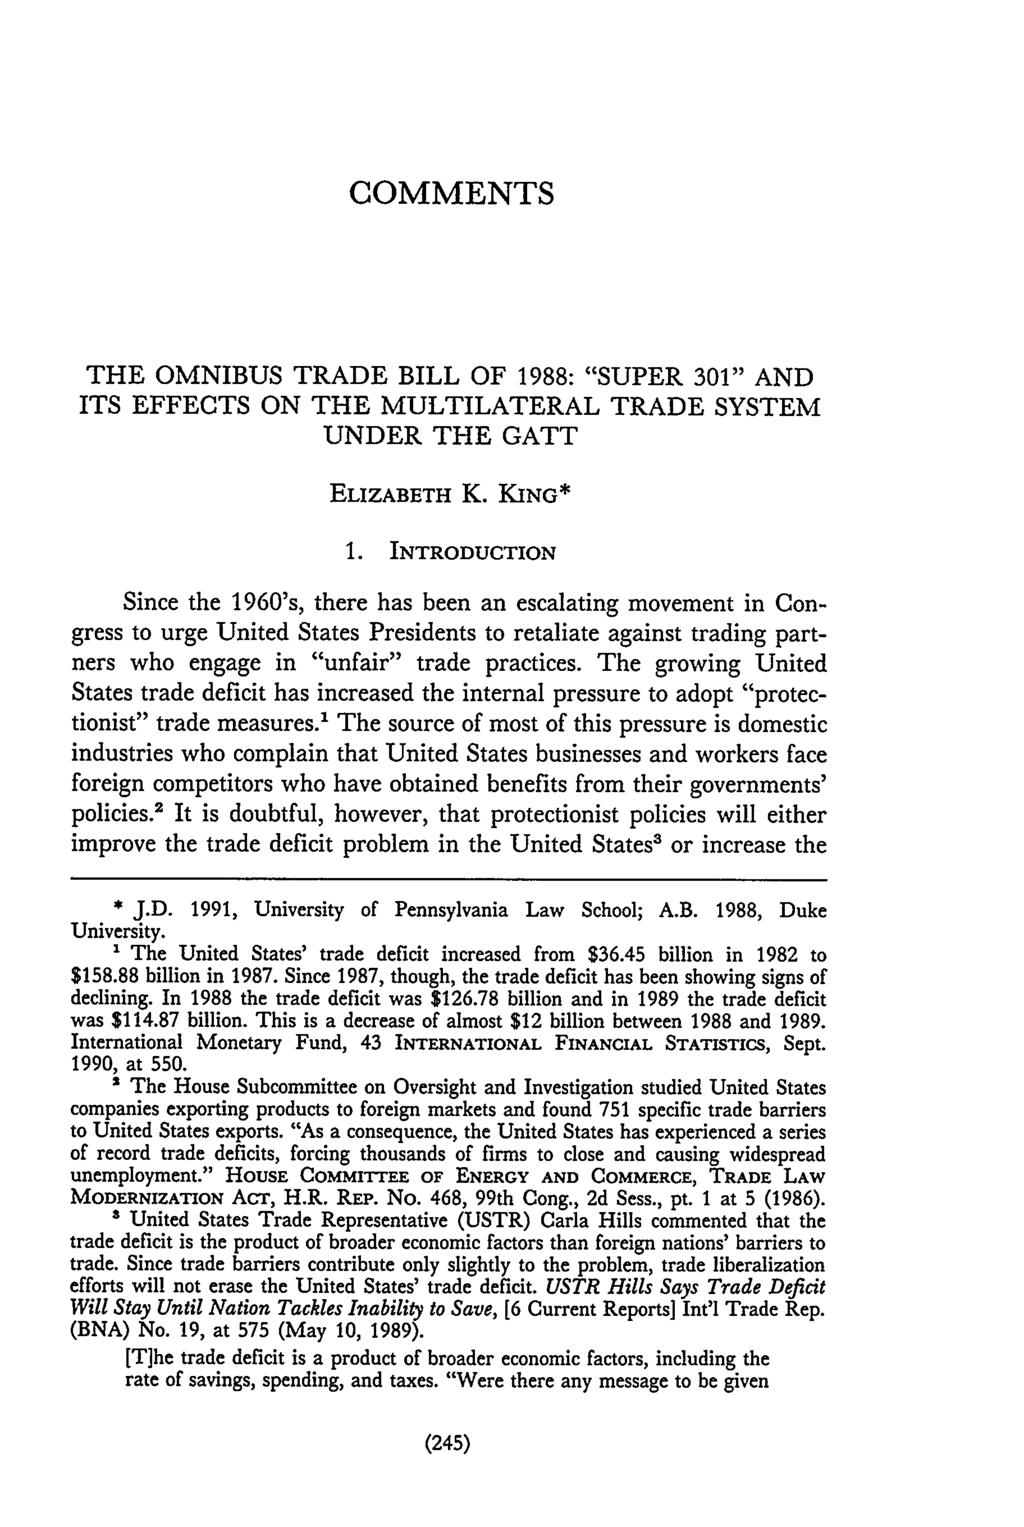 COMMENTS THE OMNIBUS TRADE BILL OF 1988: "SUPER 301" AND ITS EFFECTS ON THE MULTILATERAL TRADE SYSTEM UNDER THE GATT ELIZABETH K. KING* 1.